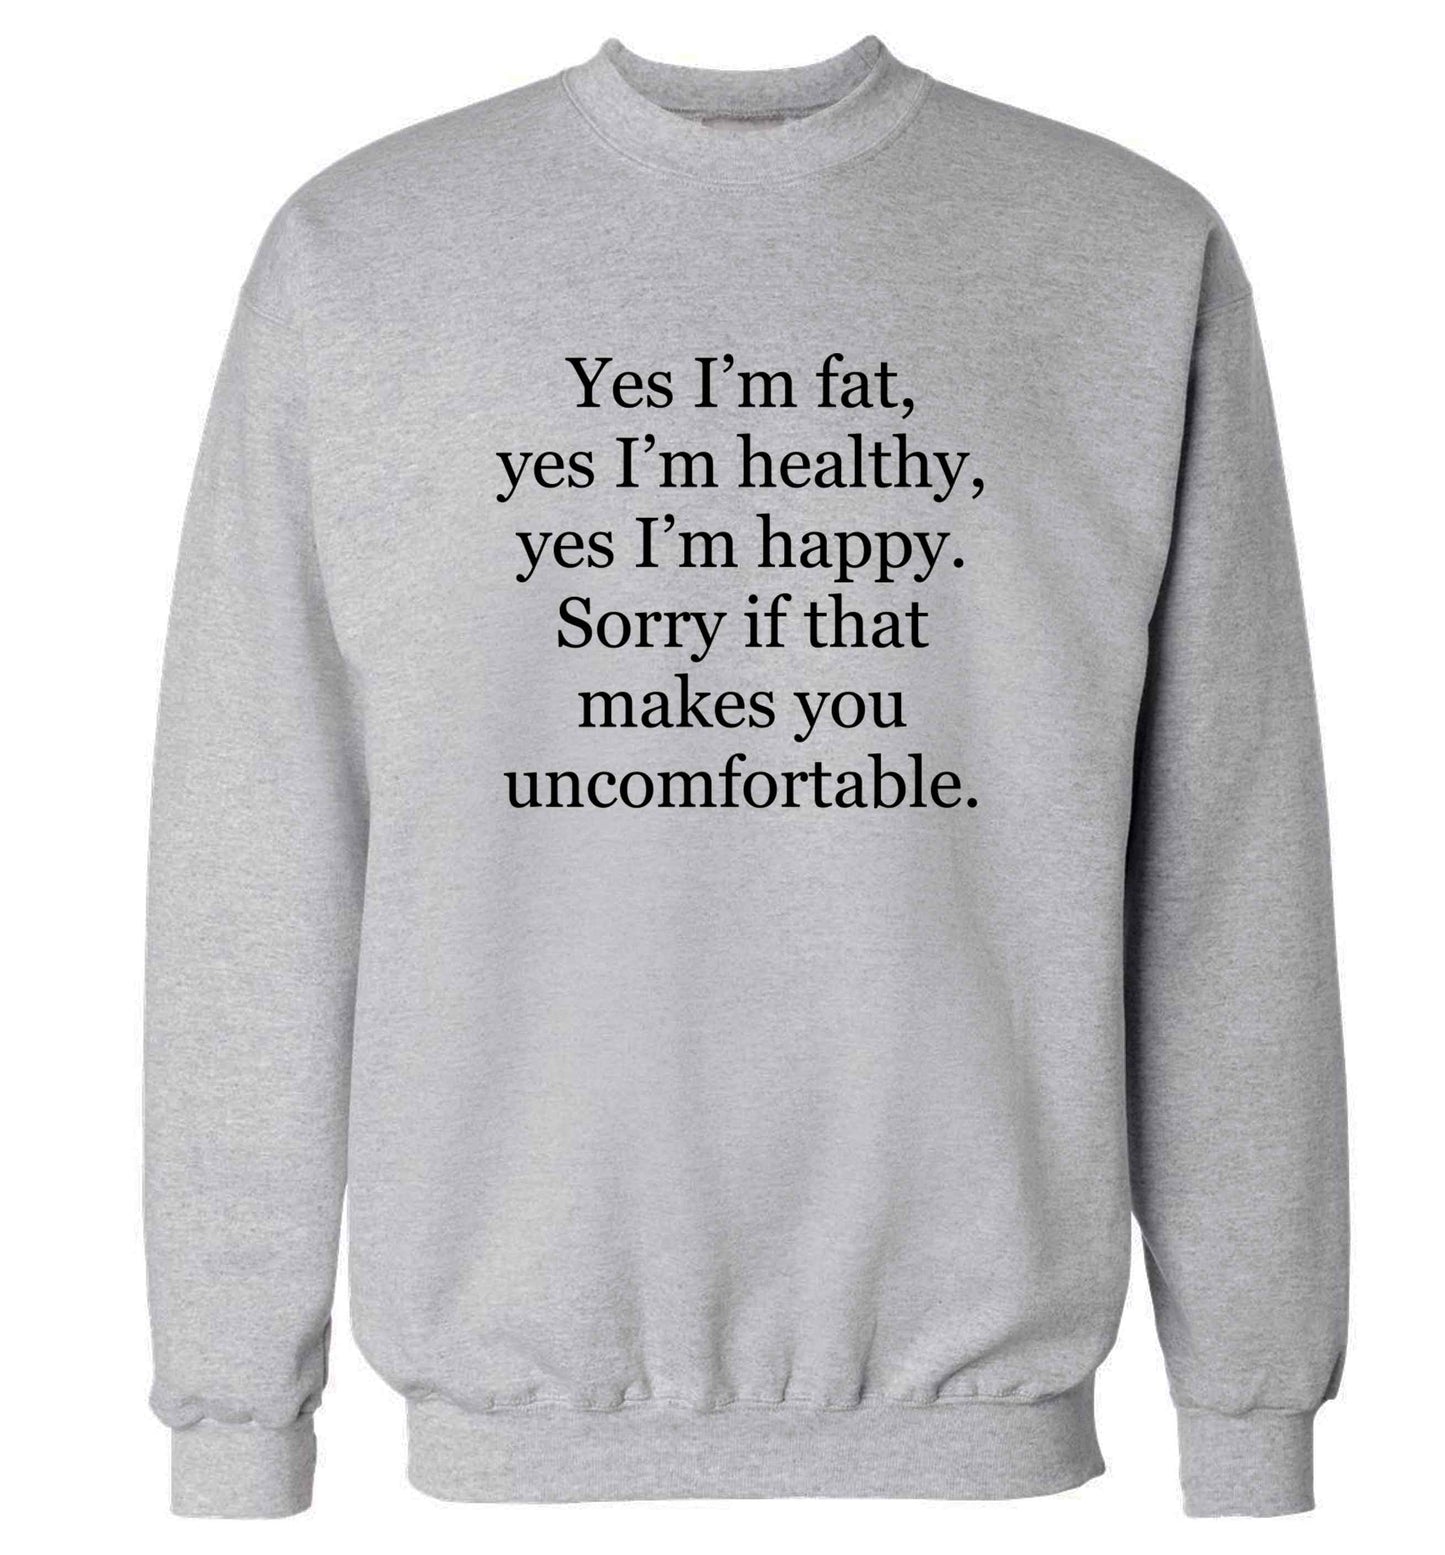 Yes I'm fat, yes I'm healthy, yes I'm happy. Sorry if that makes you uncomfortable adult's unisex grey sweater 2XL